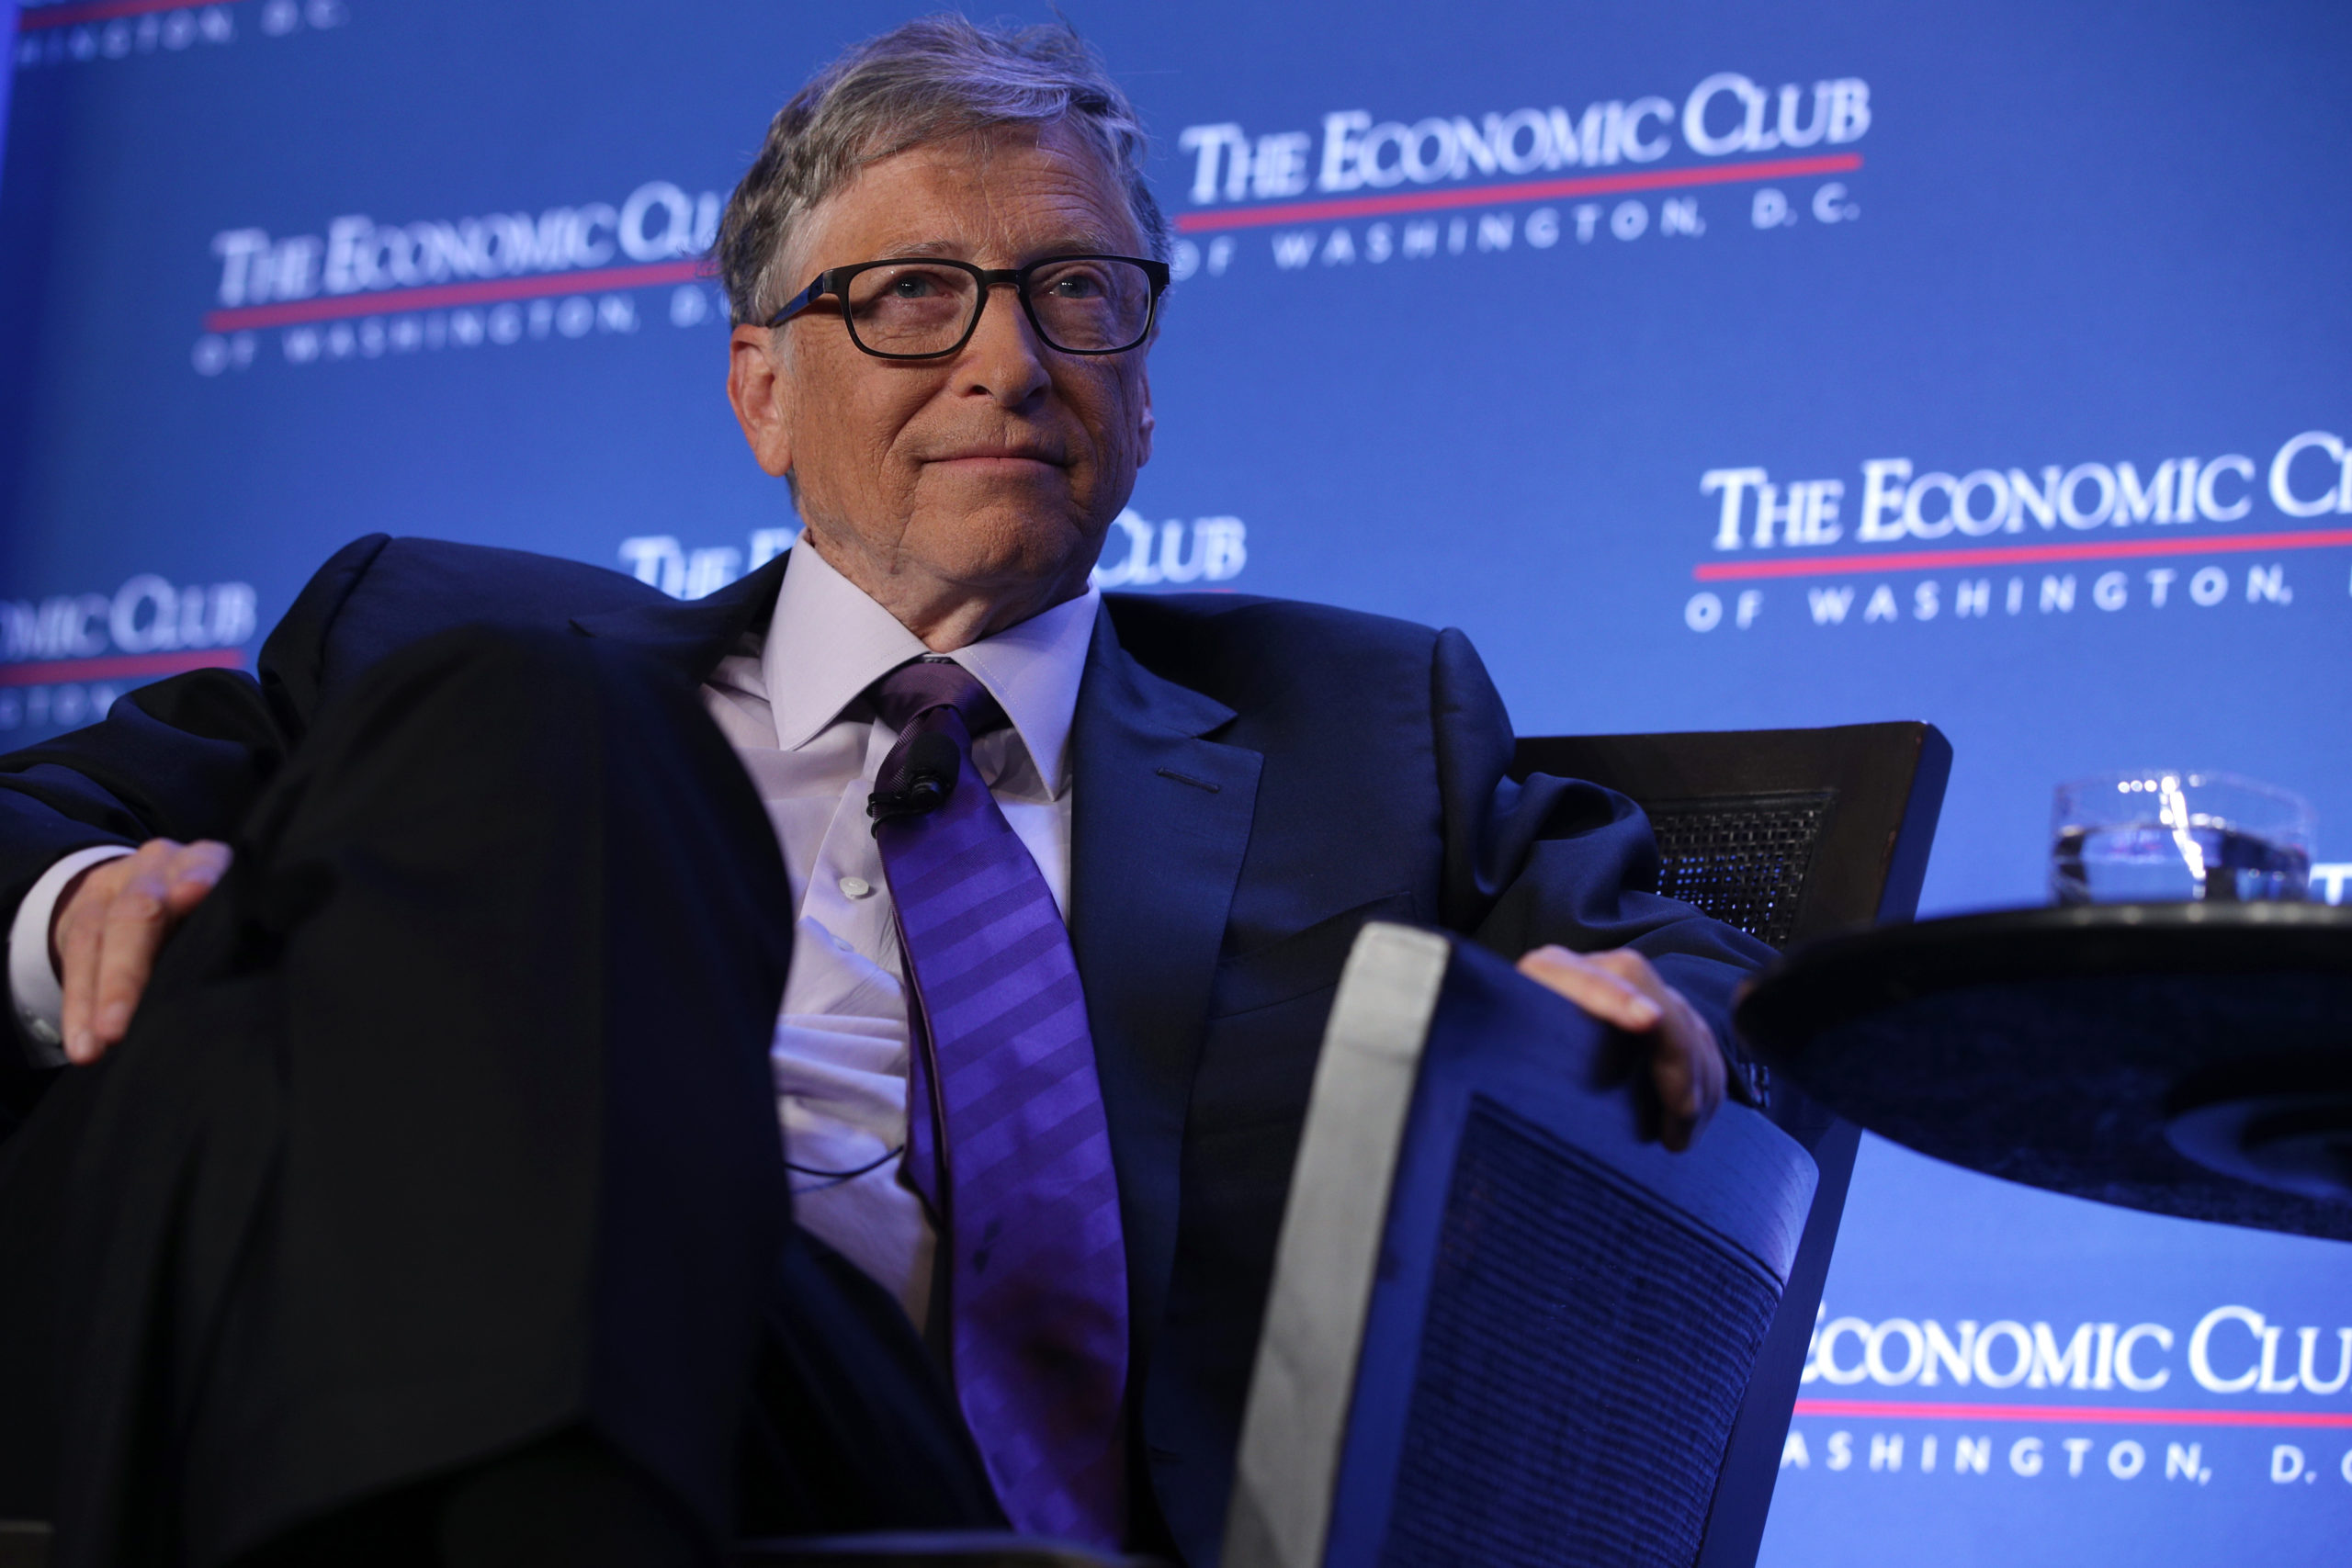 Billionaire Bill Gates has been among the leading supporters of solar geoengineering, or technology that would dim the sun to prevent climate change. (Alex Wong/Getty Images)